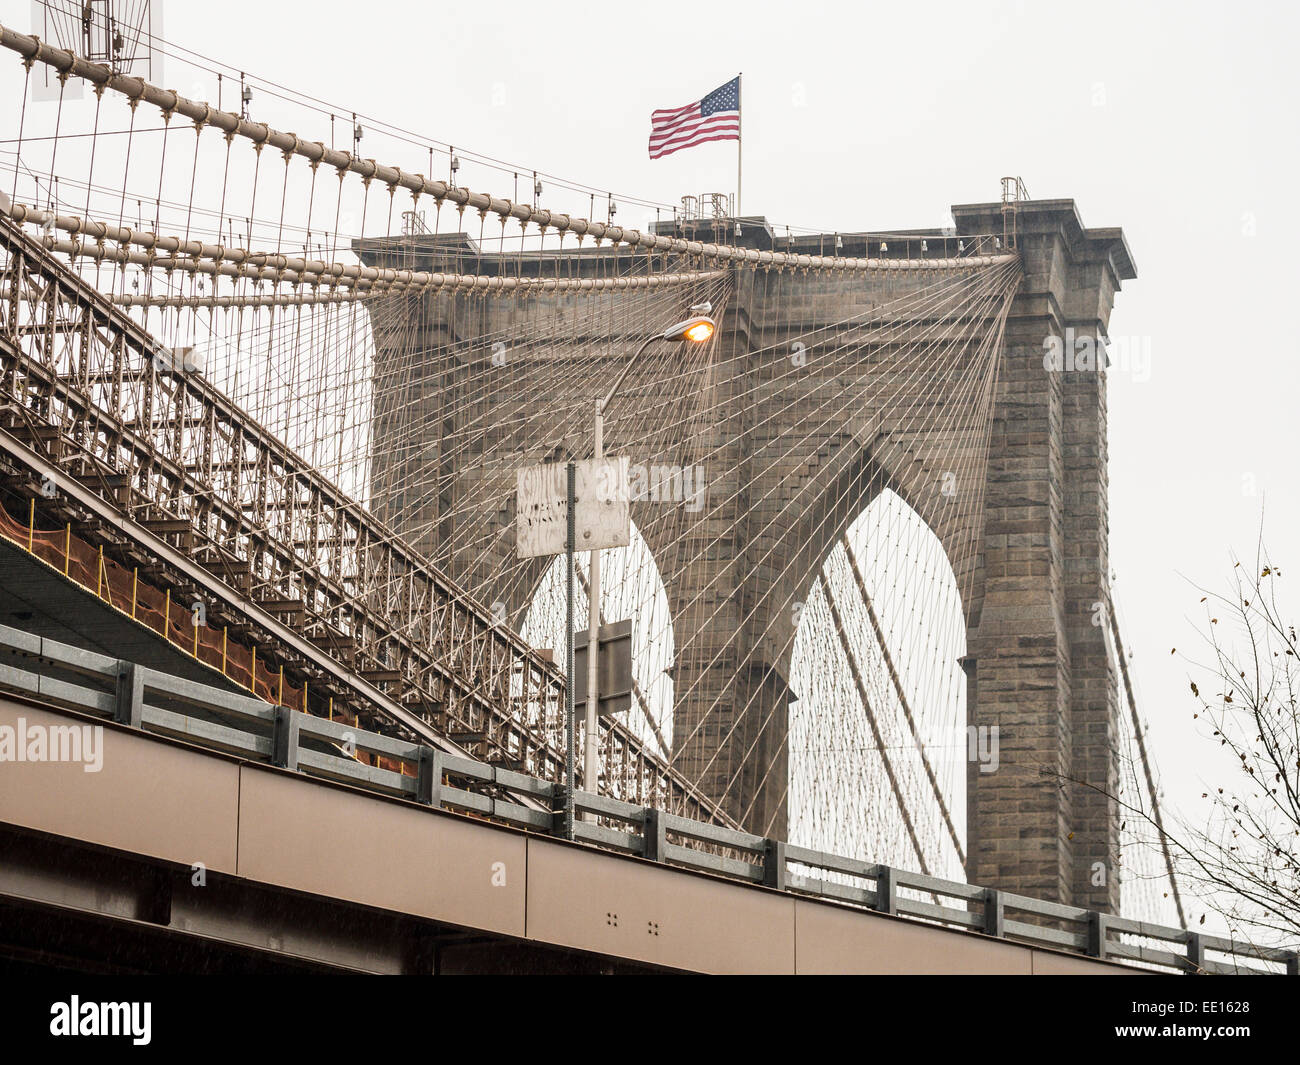 North Tower of the Brooklyn Bridge. Suspension wires and an American flag dominate this image of the famous bridge from below. Stock Photo